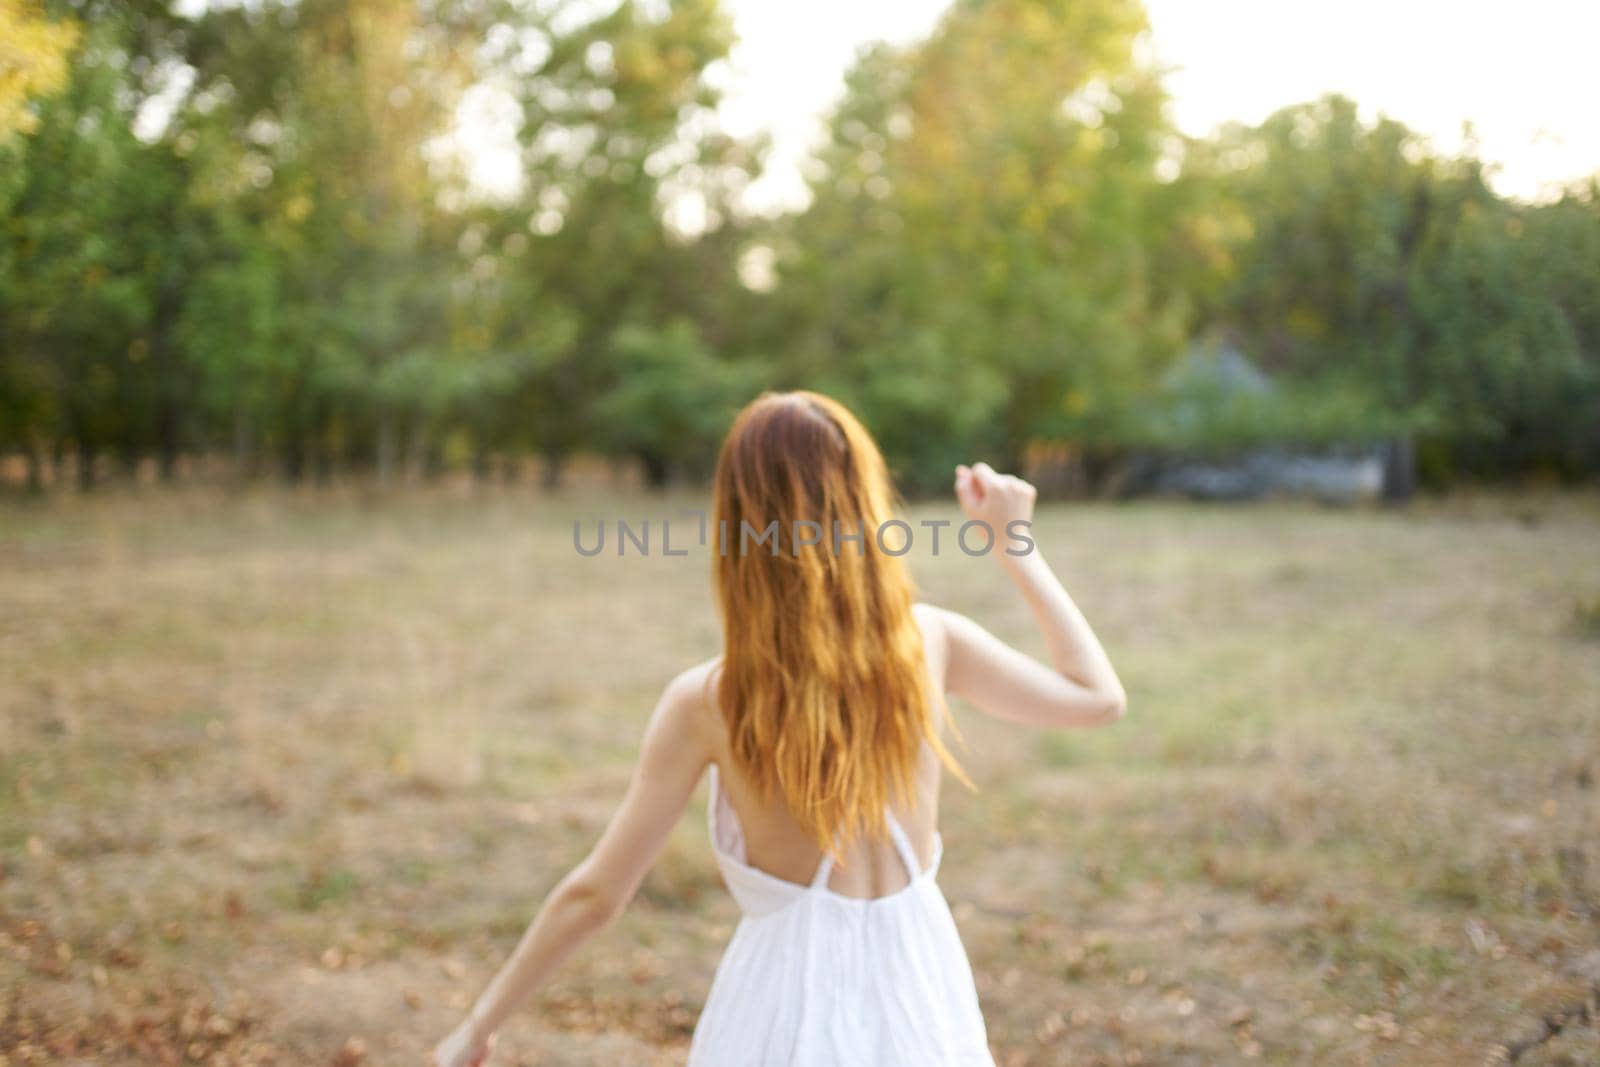 happy red-haired woman in white dress runs on dry grass in nature near trees by SHOTPRIME